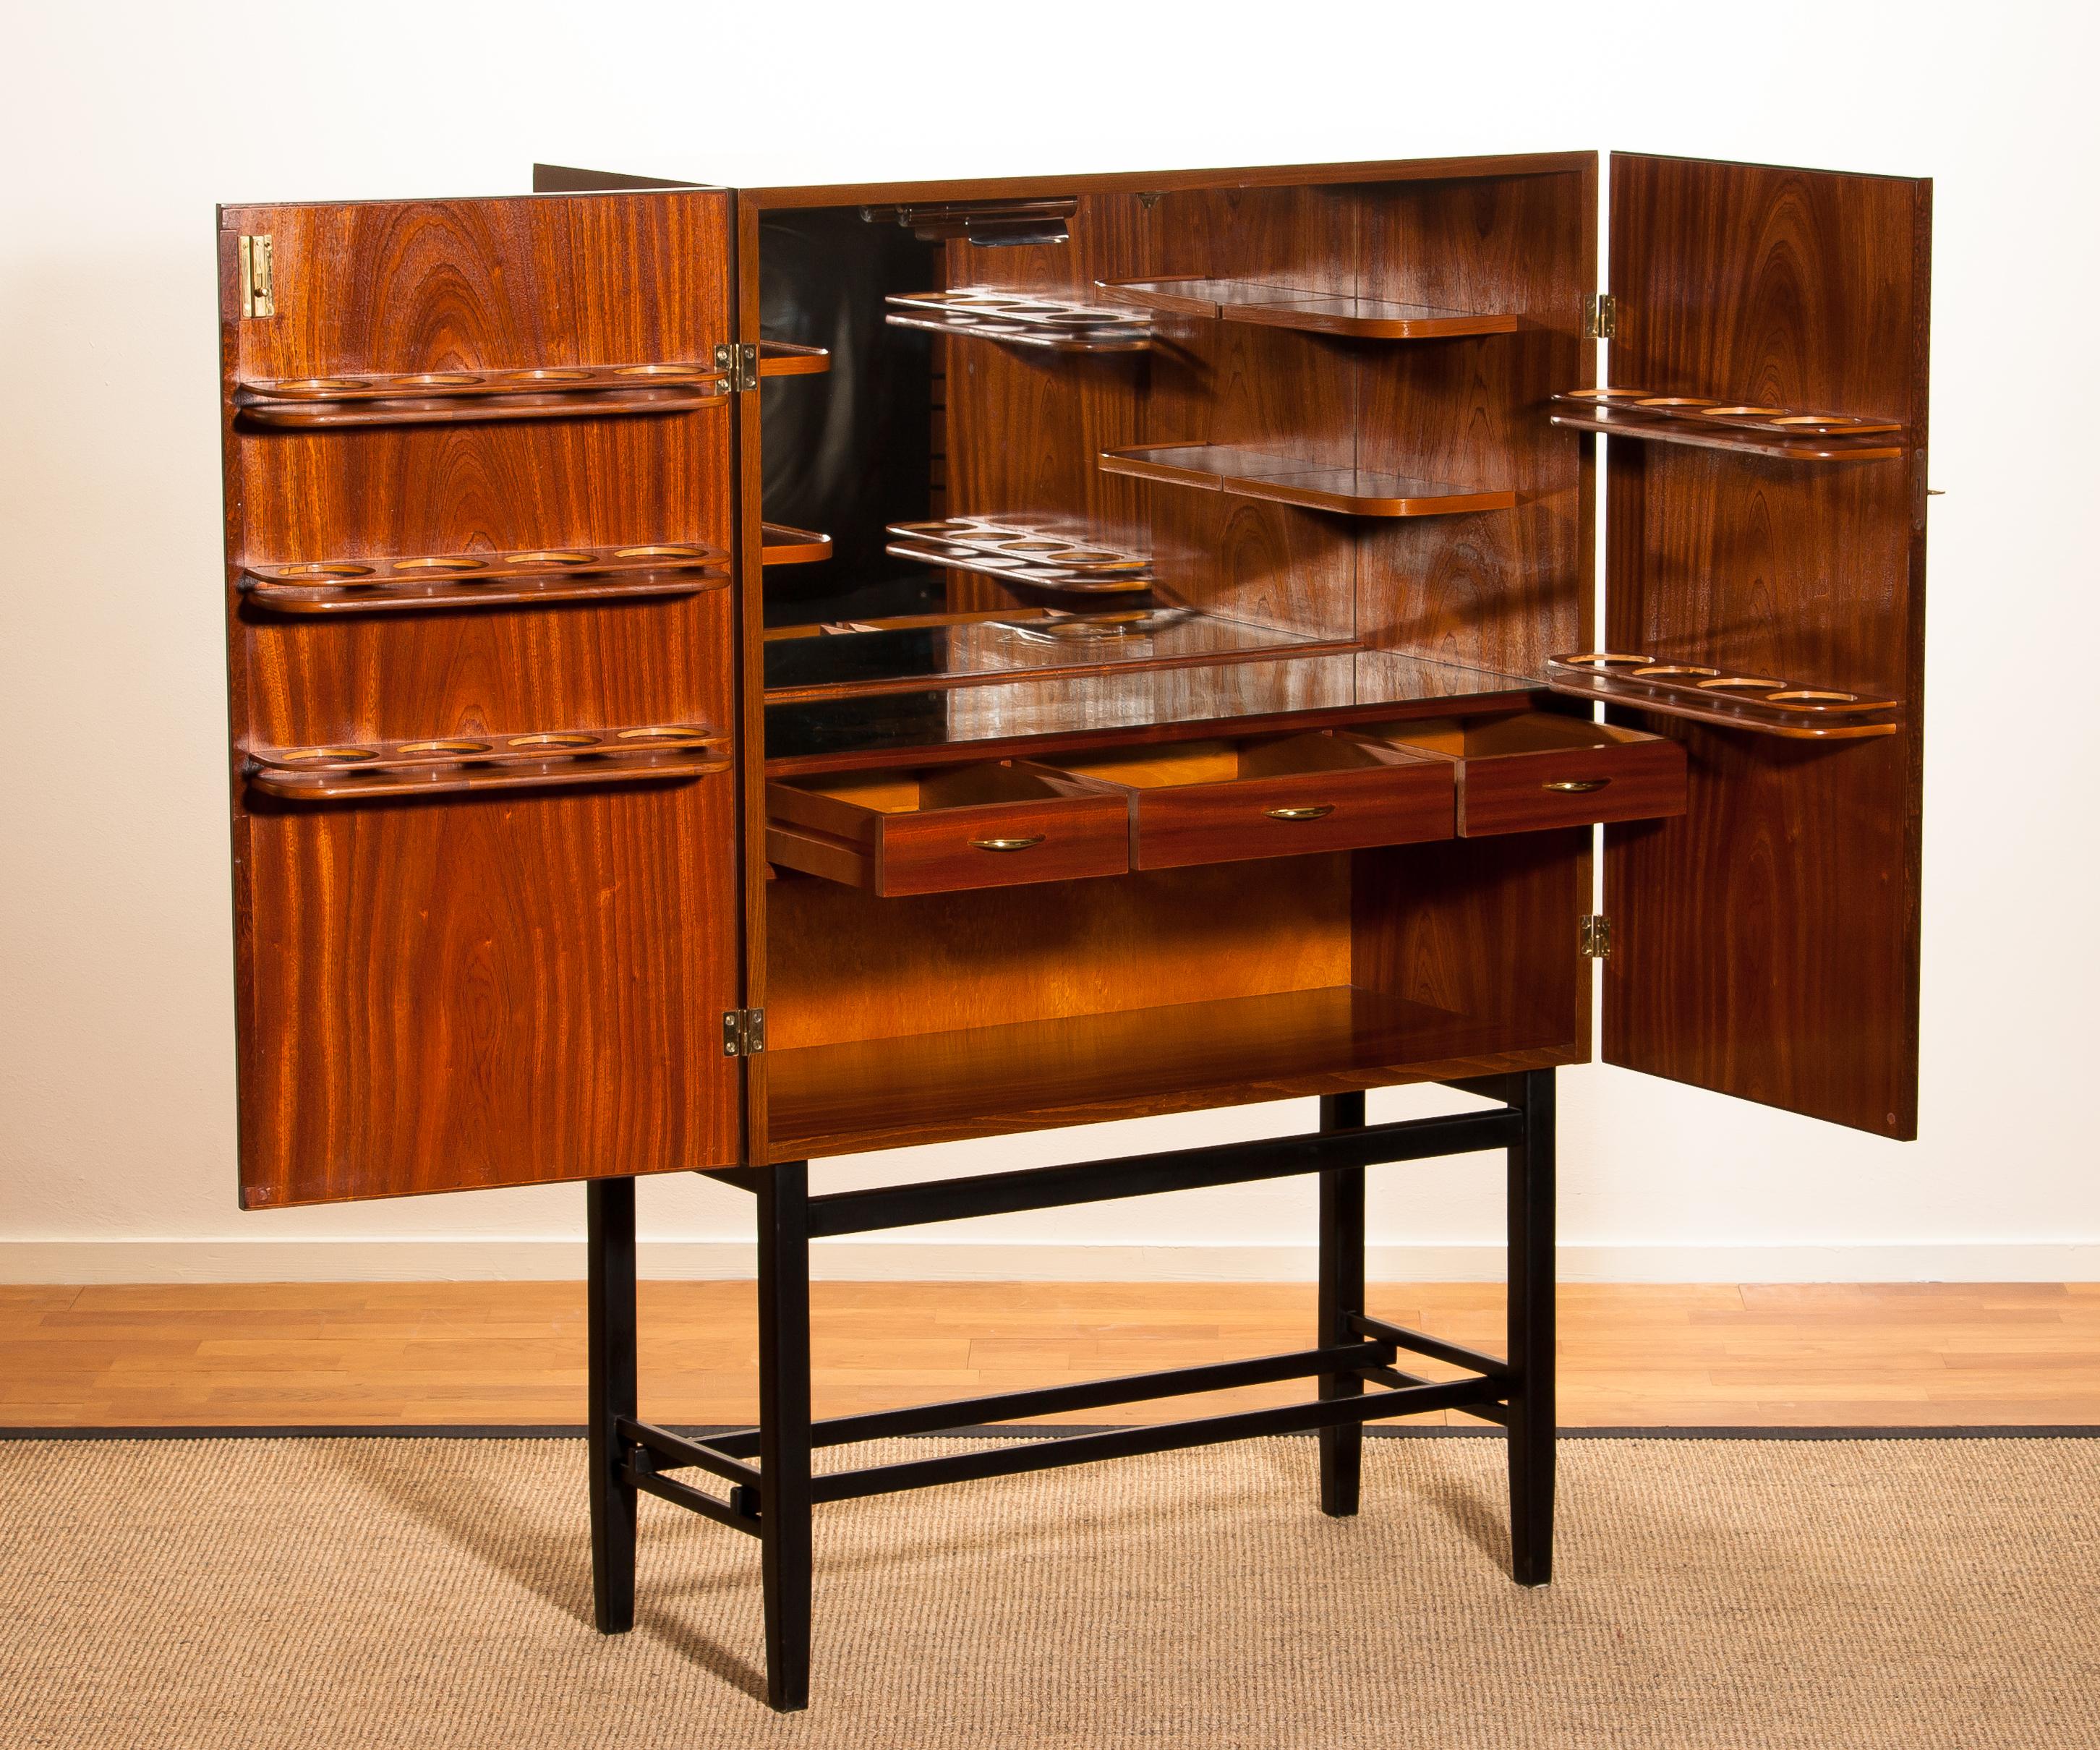 Extremely beautiful and unique dry bar or cocktail cabinet. The cabinet is made of mahogany inside and outside. This high-quality cabinet is made by Förenade Möbelfabrikerna Linköping and dated/ labelled/signed 4 May 1968.
Inside the dry bar